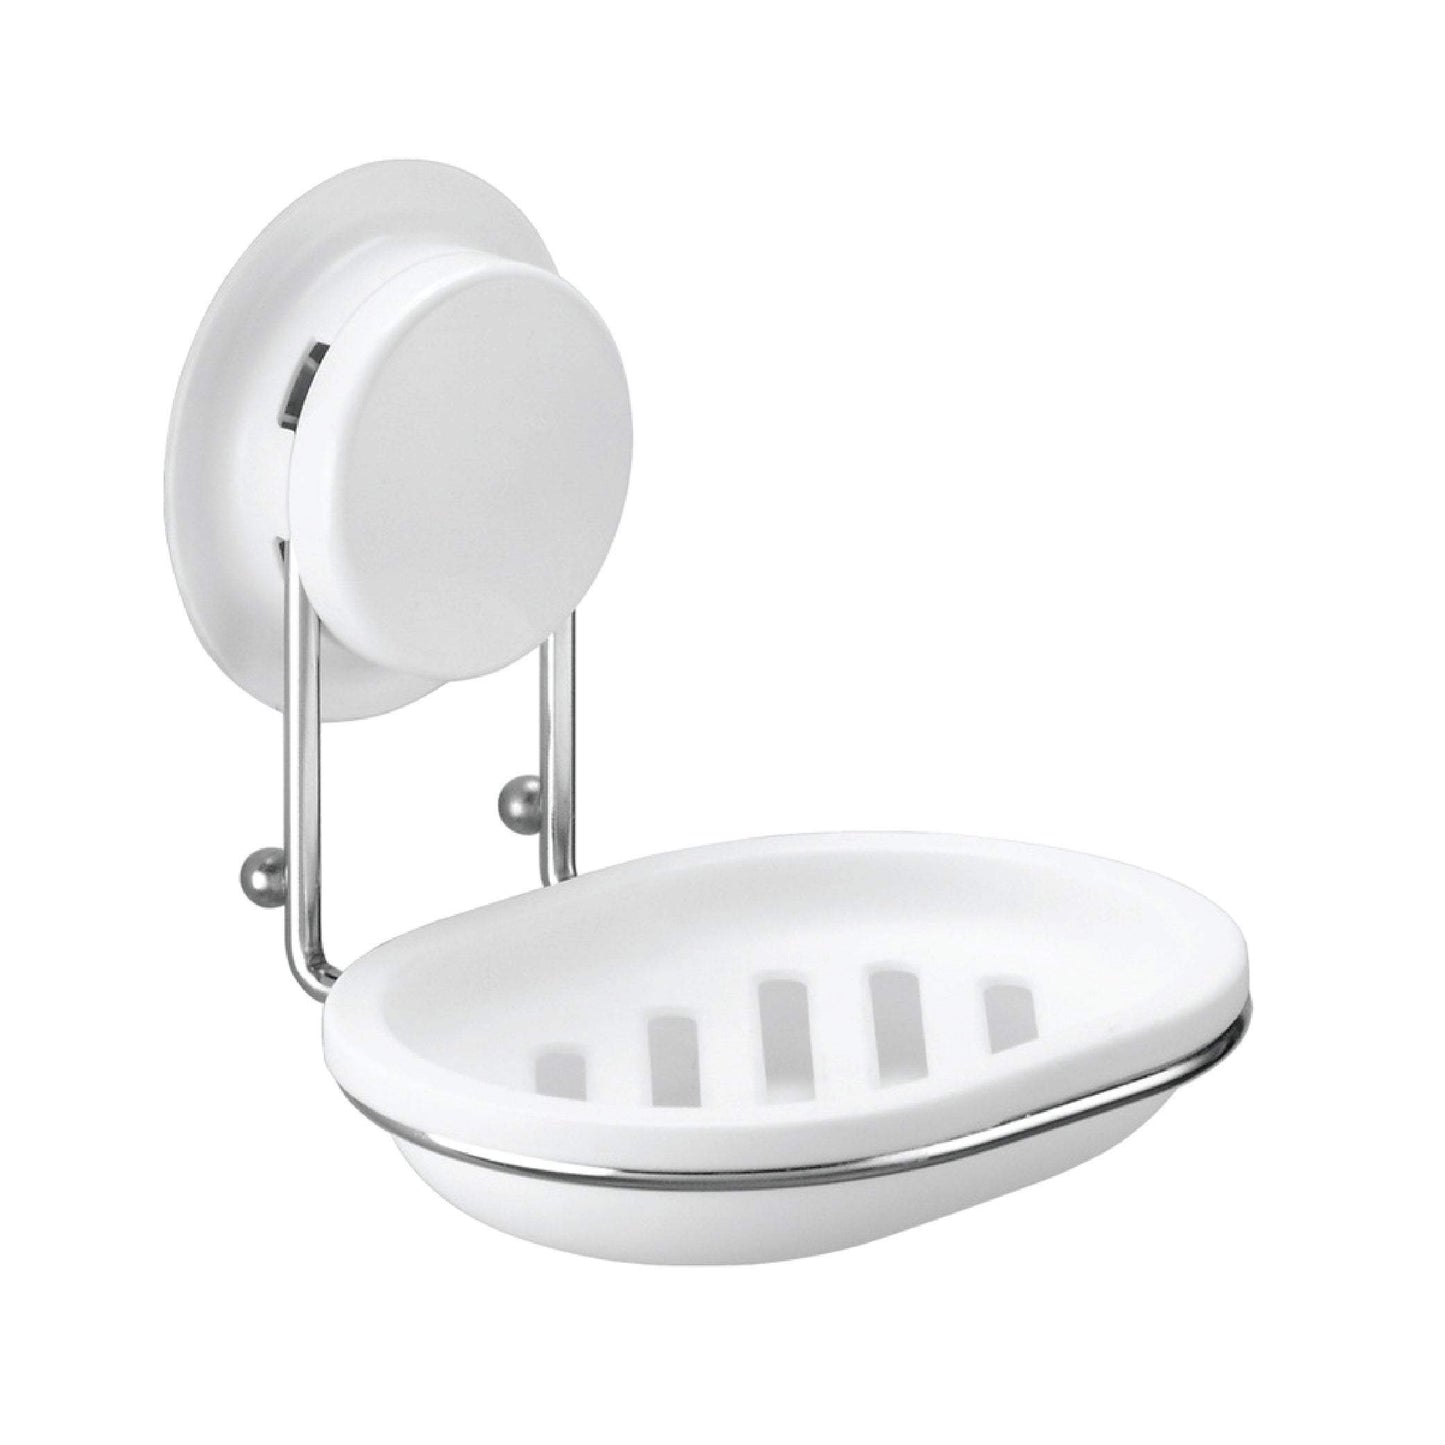 Suction Soap Holder 260001 was designed with a plastic draining soap dish,  can be mounted with suction or glue for bathroom or toilet. You can easy to fix on the wall, put soap on it without the mess.